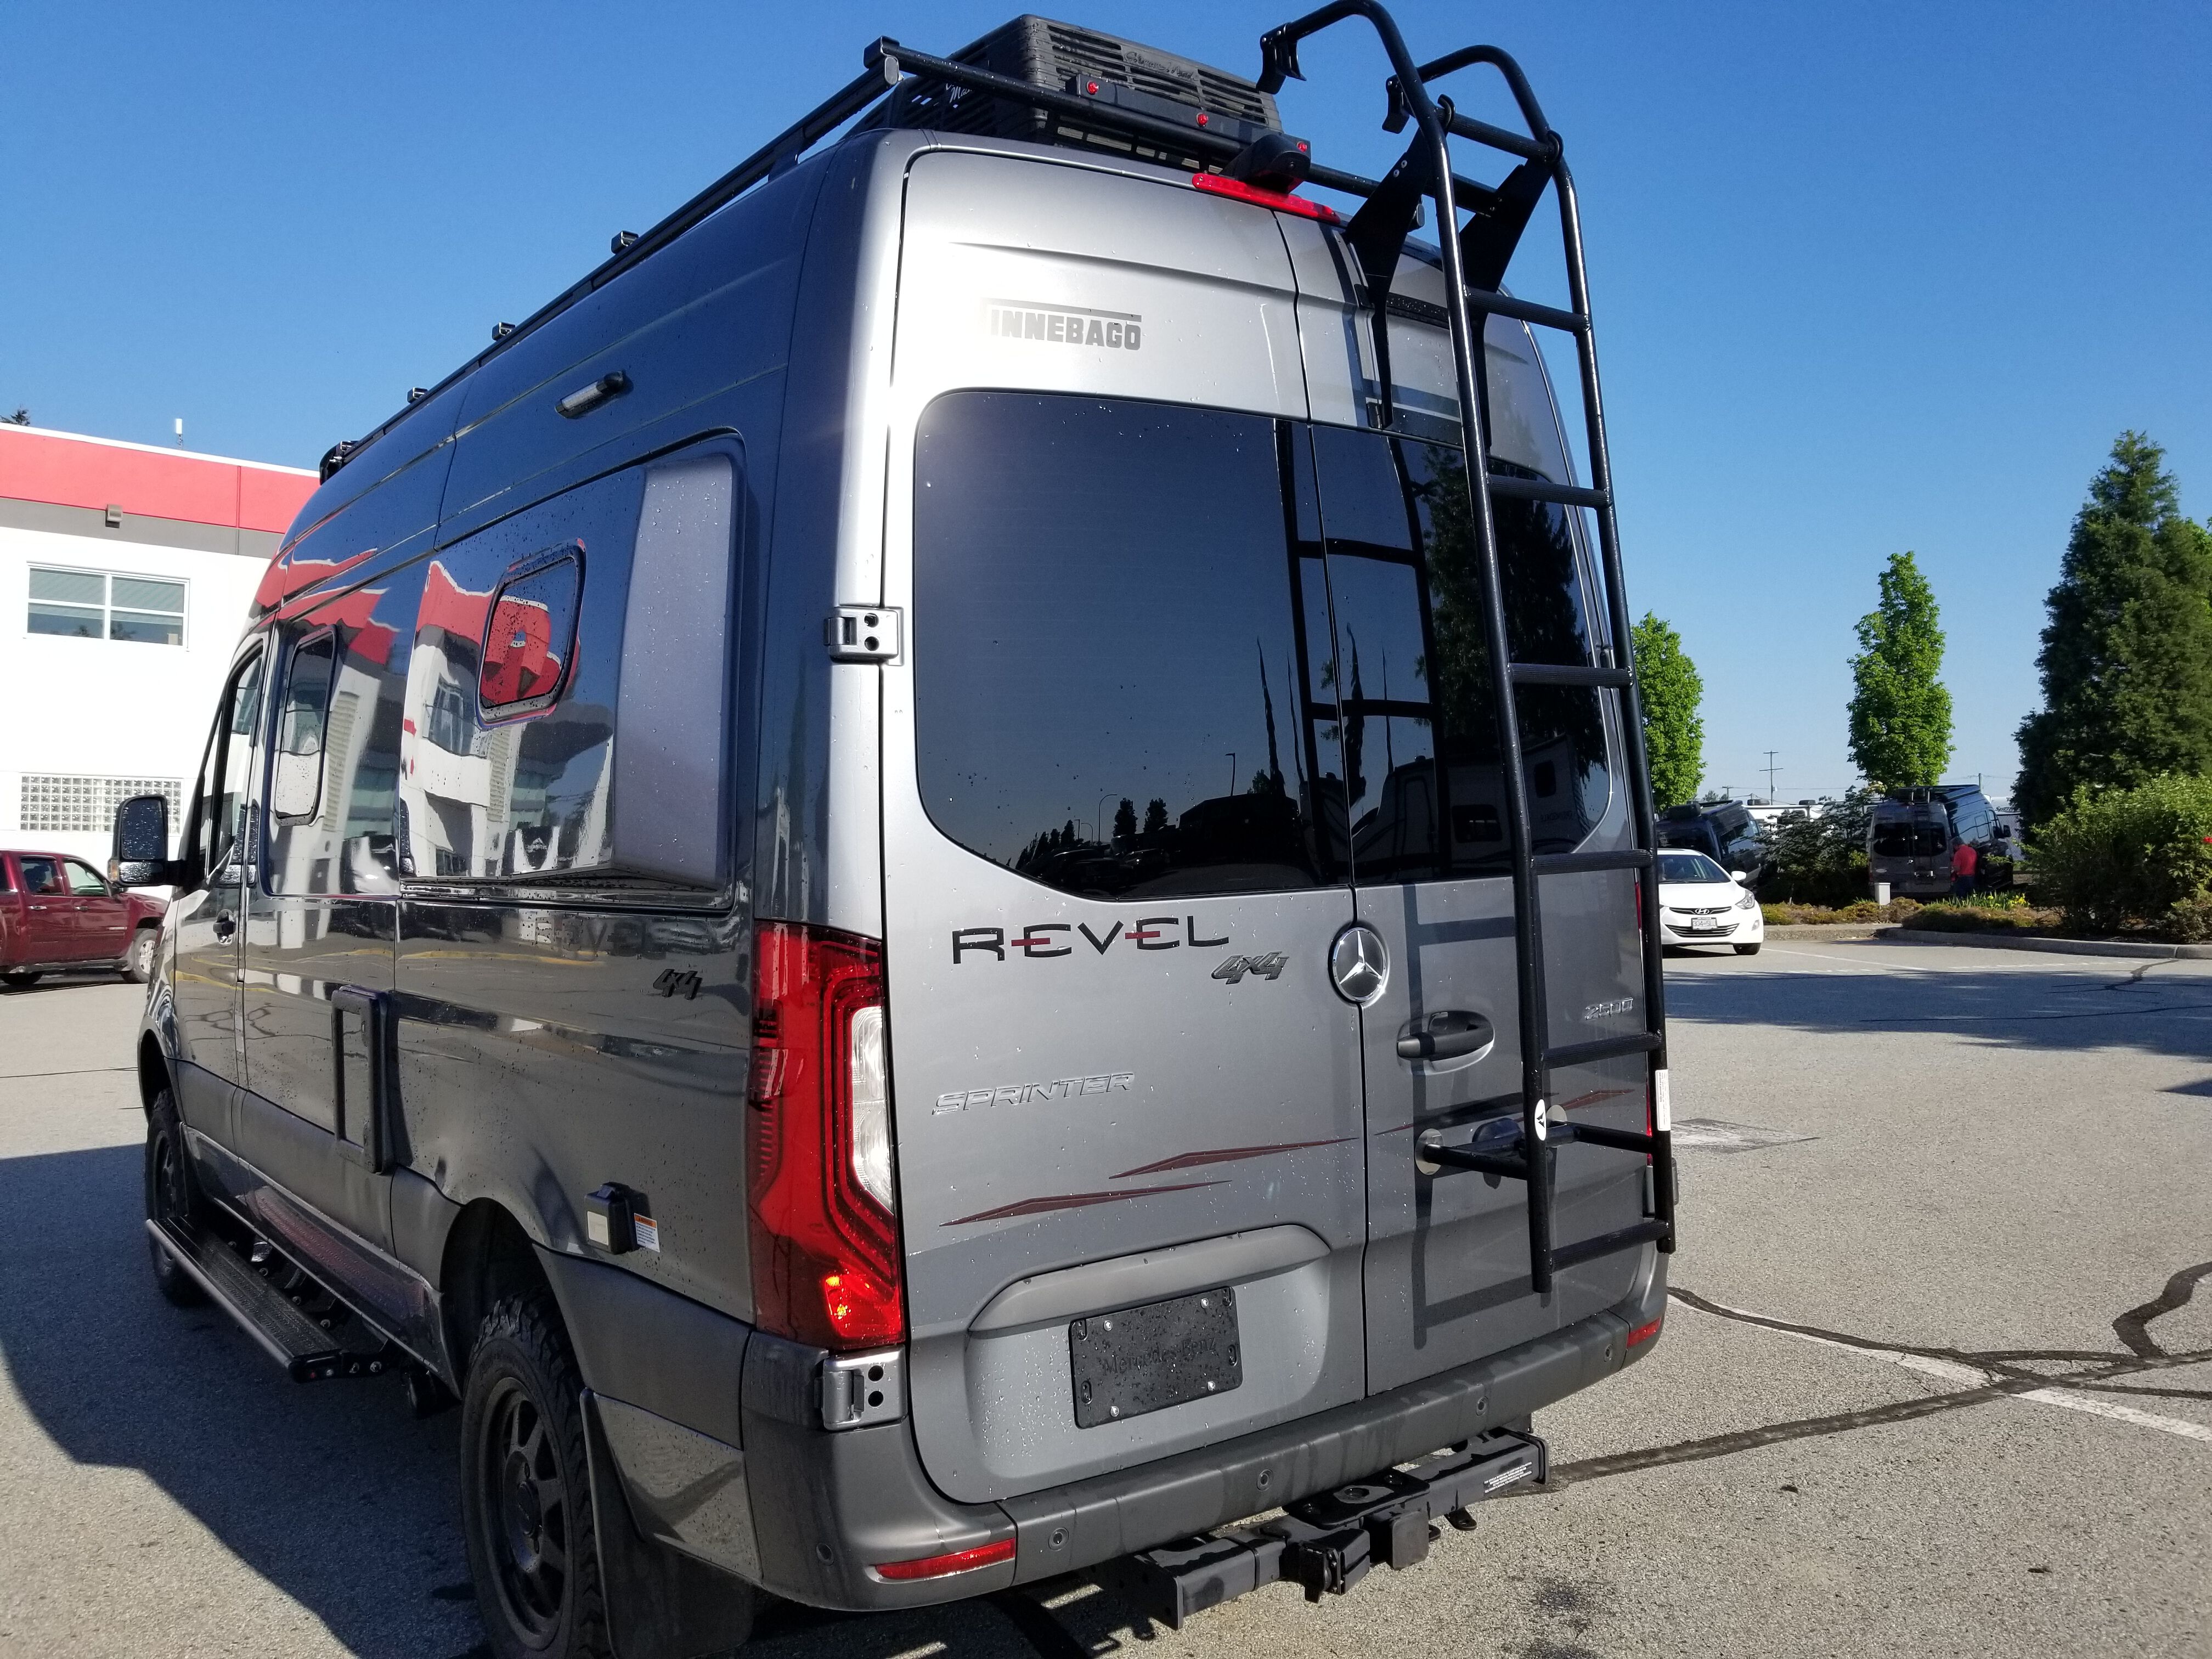 2023 WINNEBAGO REVEL 44E*22 for CAD 260599.00  Find this Van Conversion  and other RVs at Fraserway RV in Abbotsford Fraserway